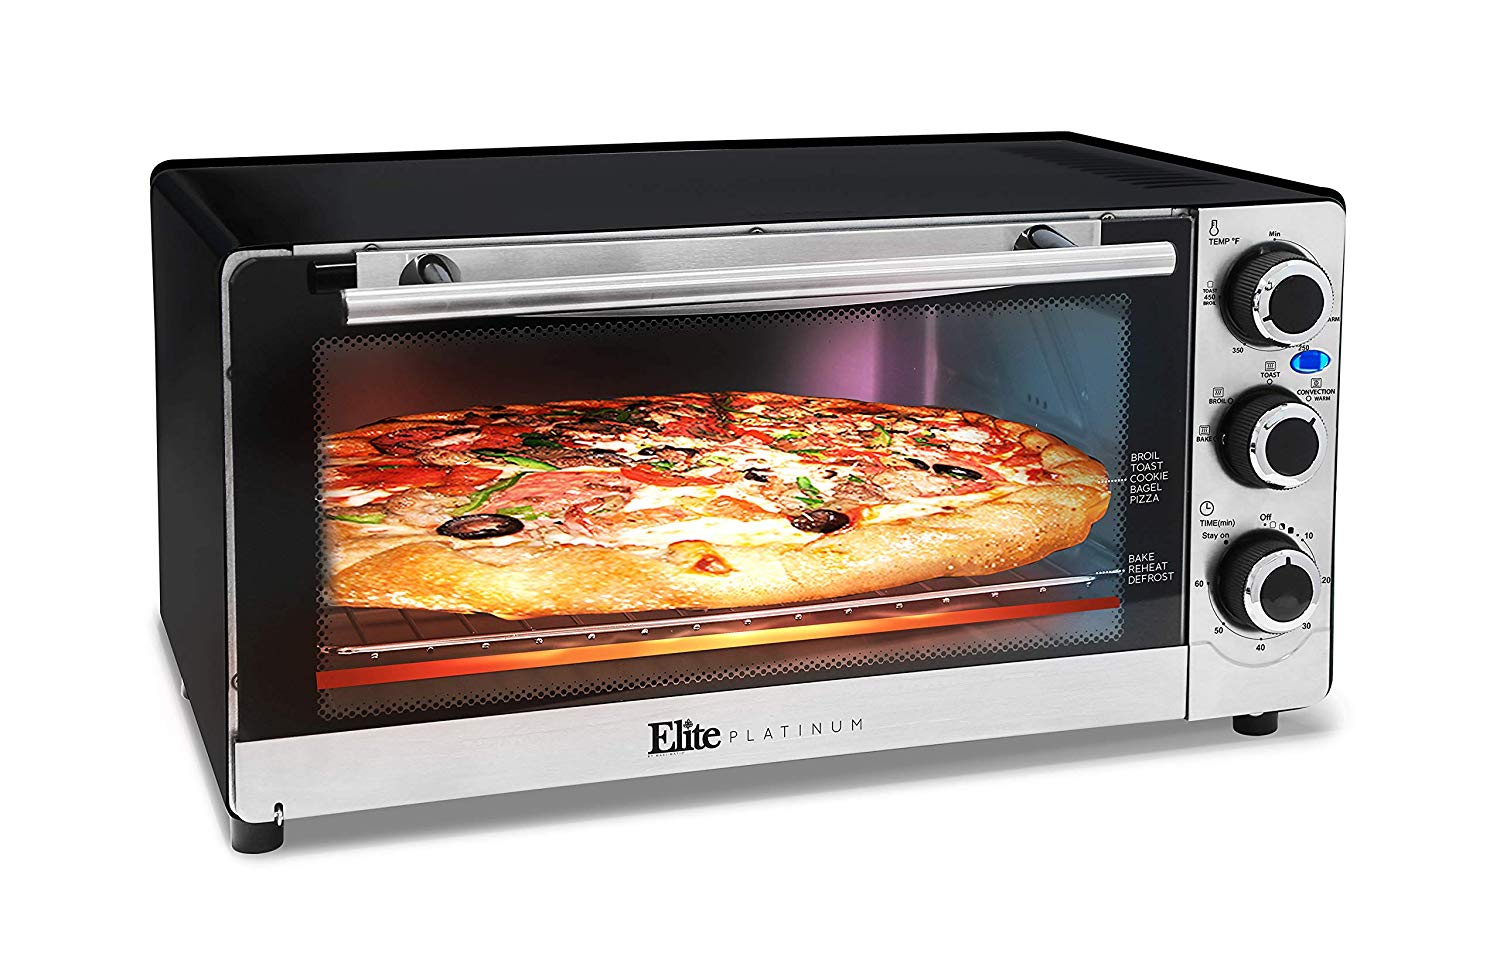 Maximatic ETO-140C Elite Platinum Stainless Steel 6 Slice Convection Toaster Oven Silver